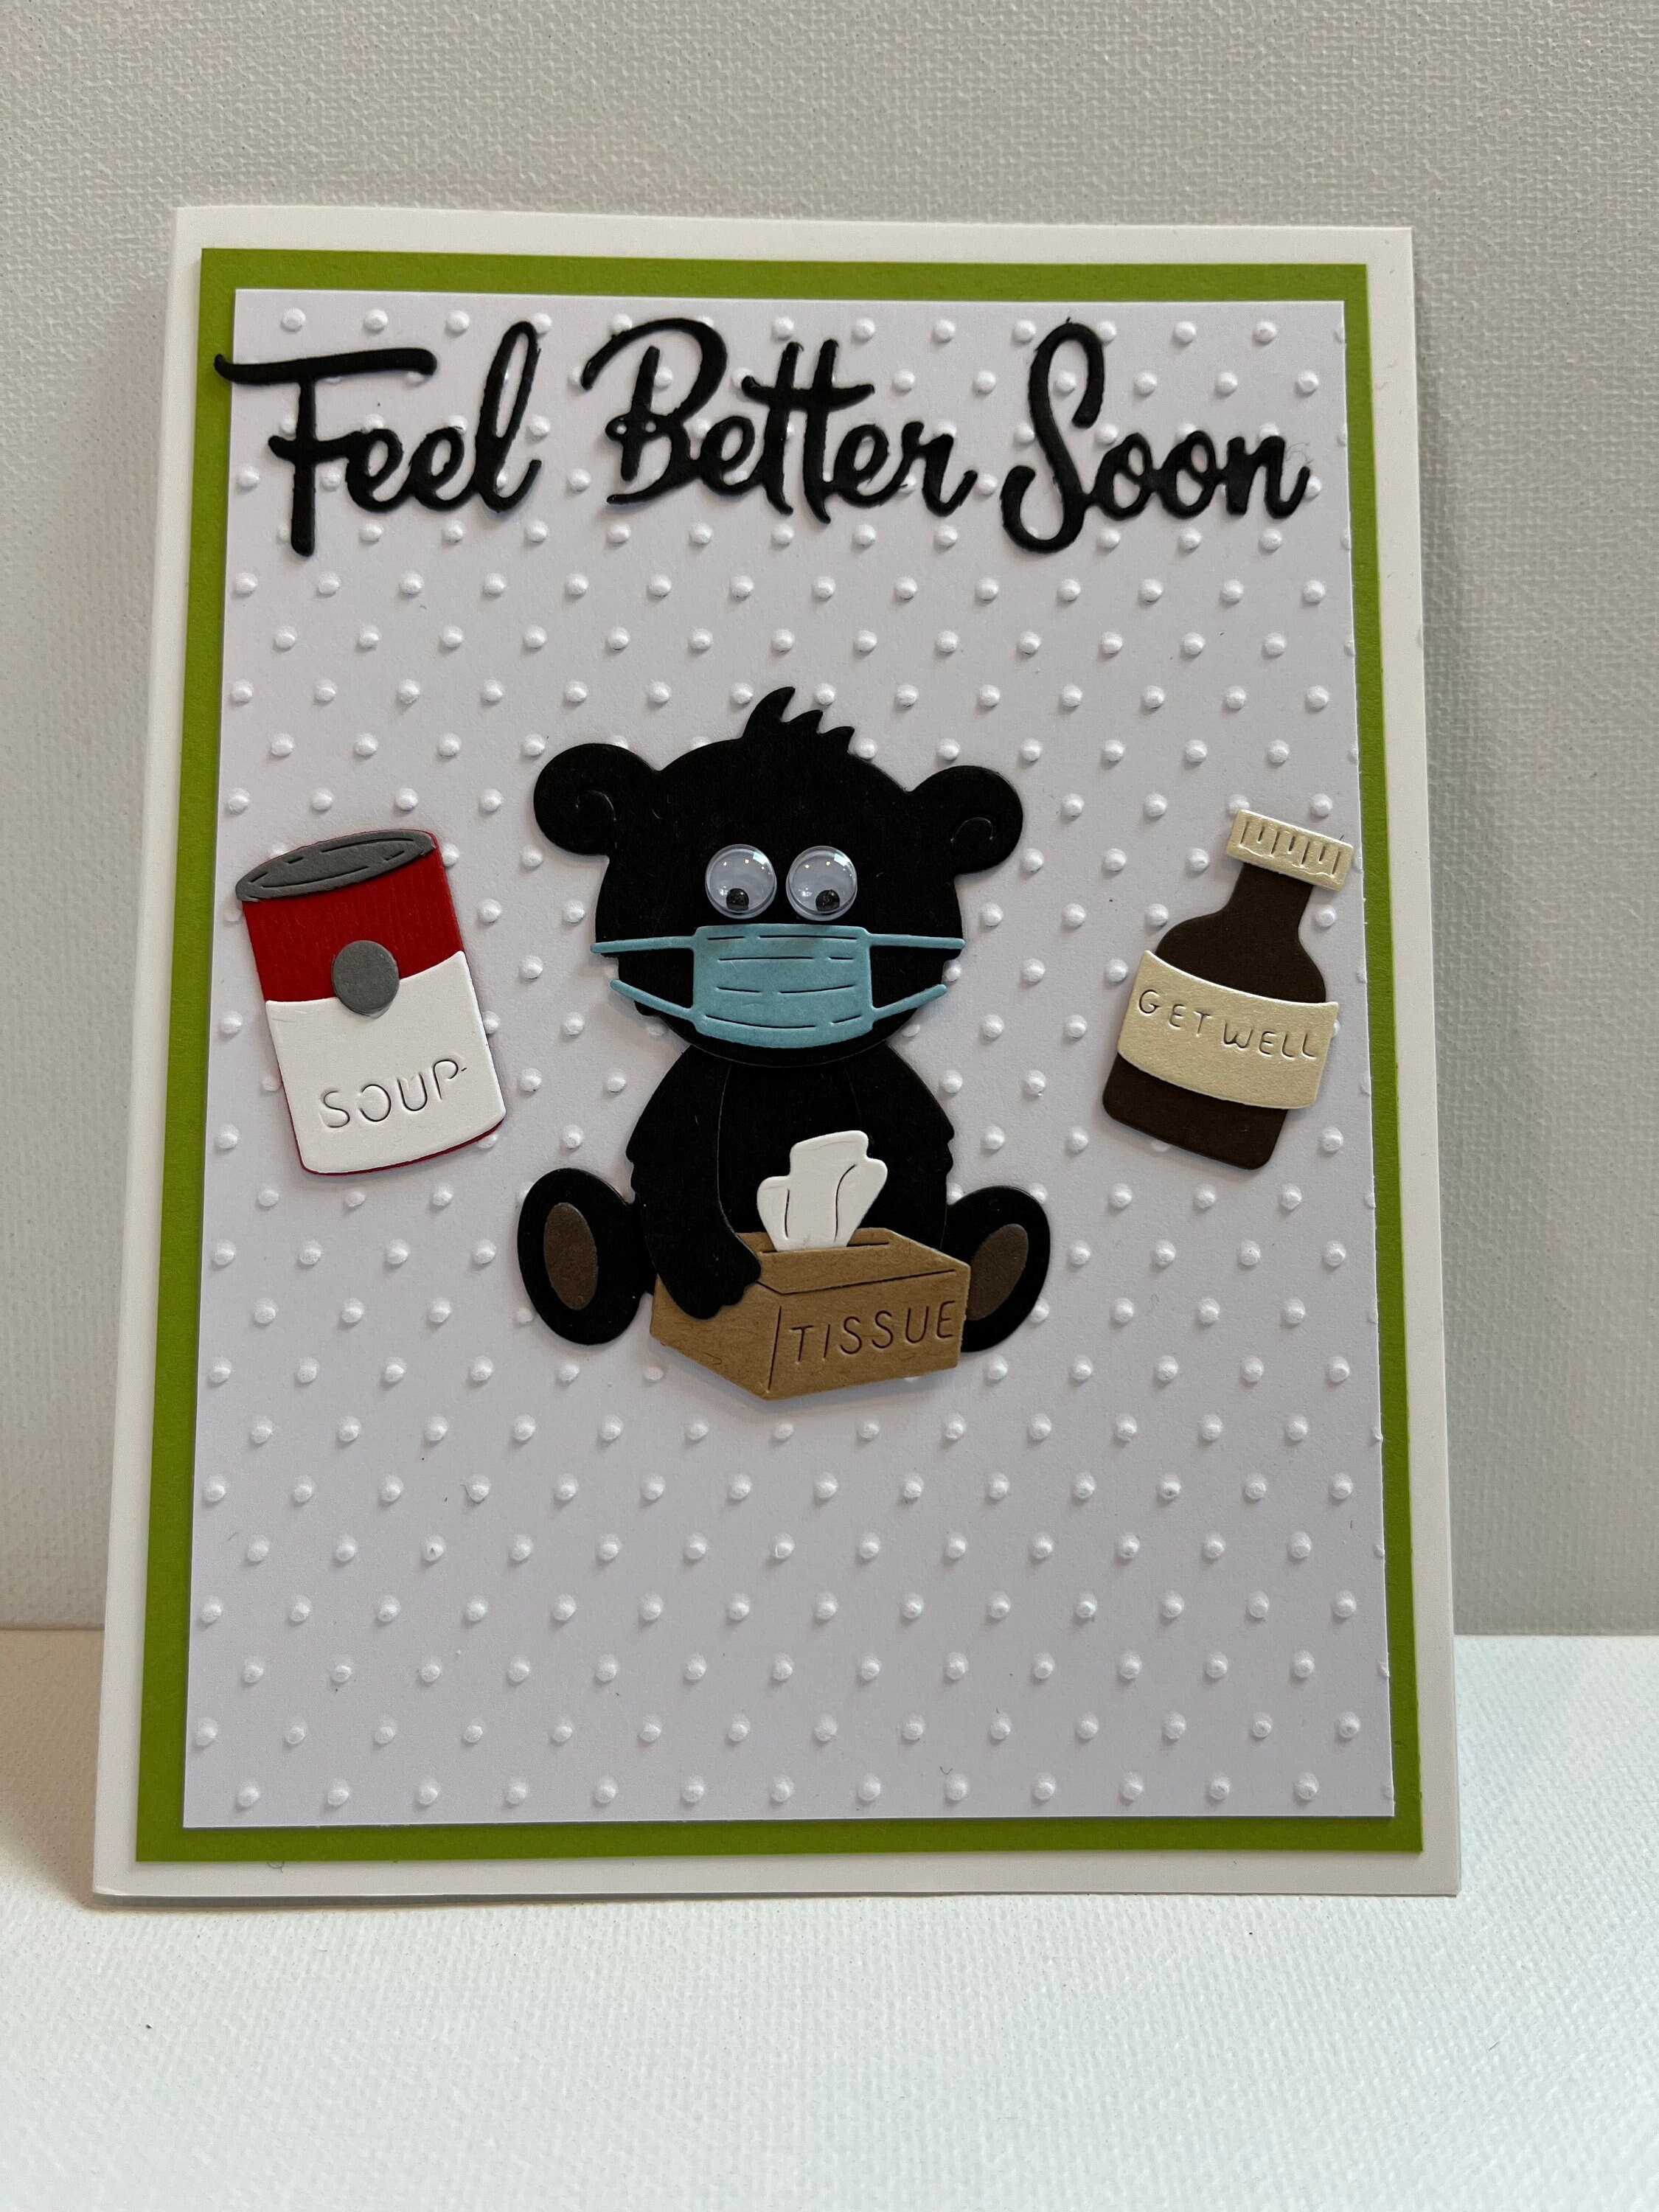 Cute Tough Teddy, Sweet Get Well Soon/Stay Strong Card